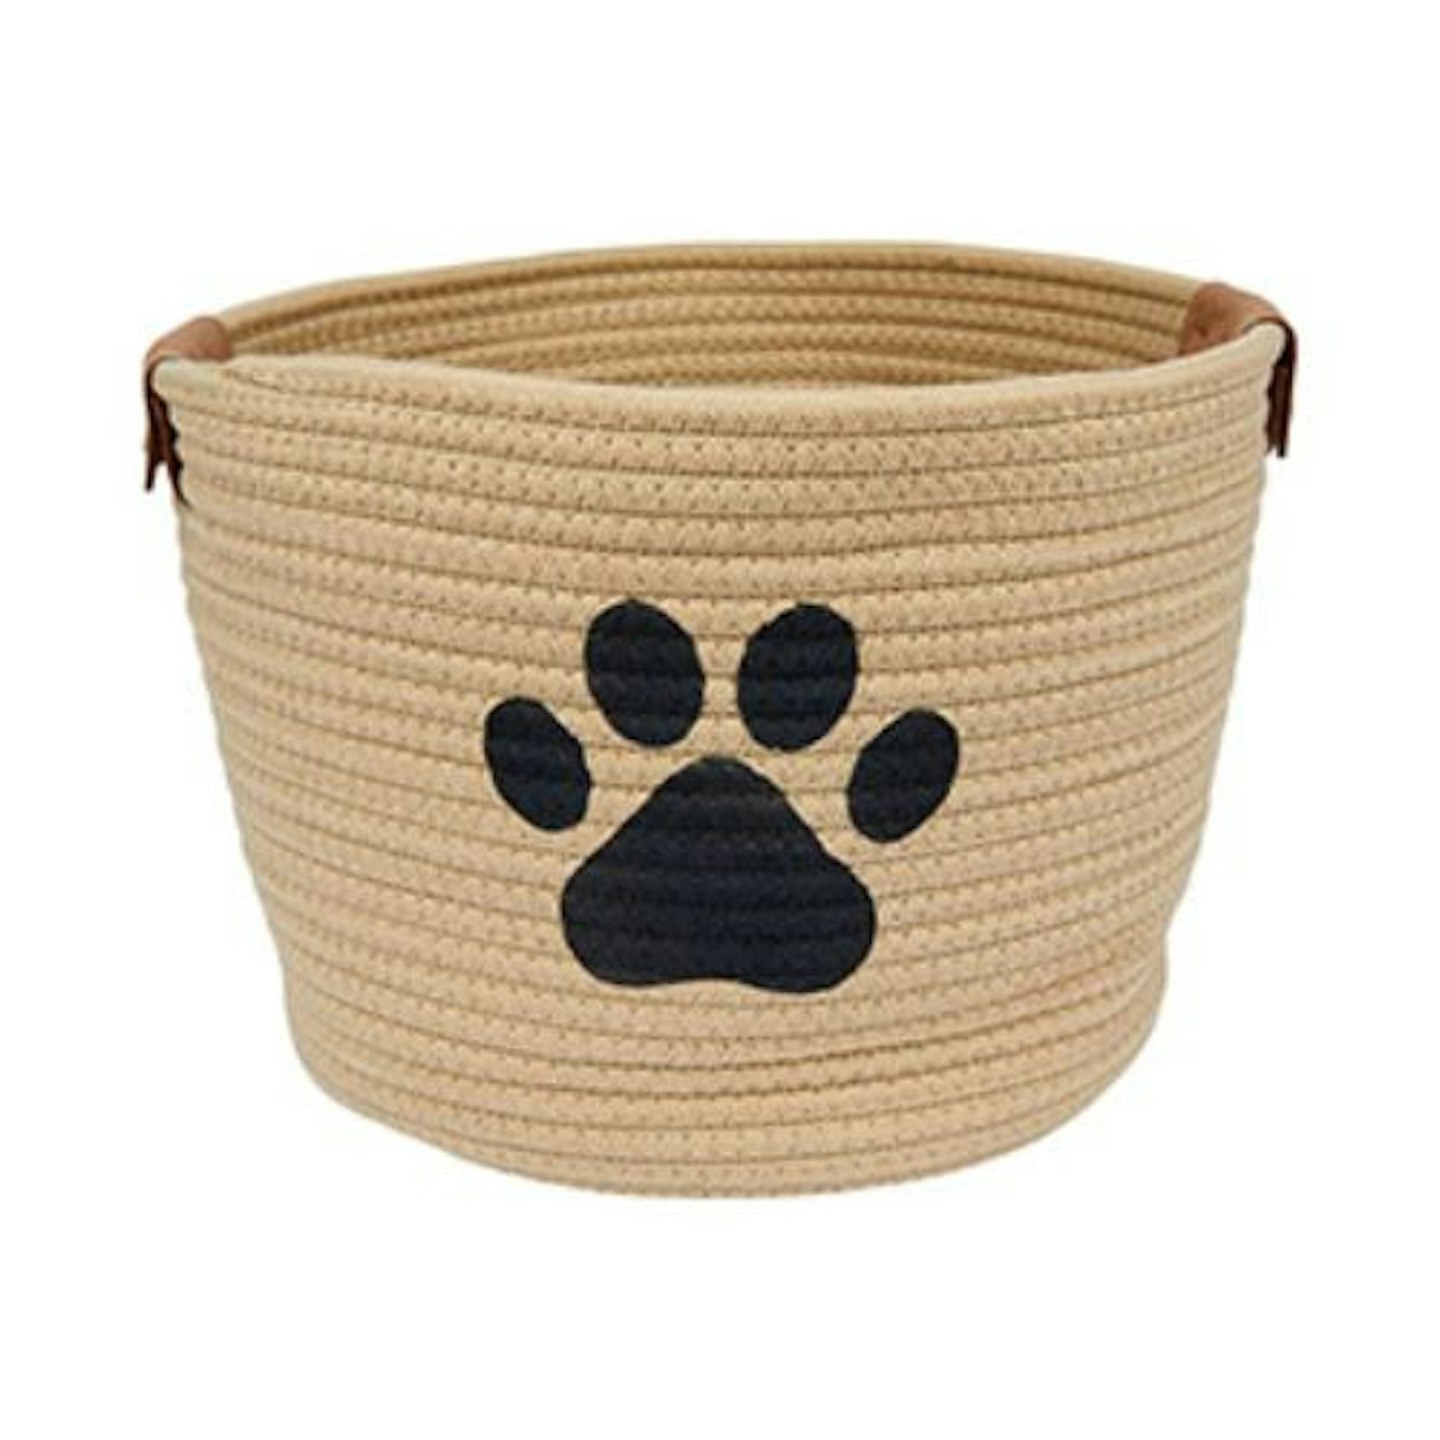 Pets at Home Rope Pet Toy Box